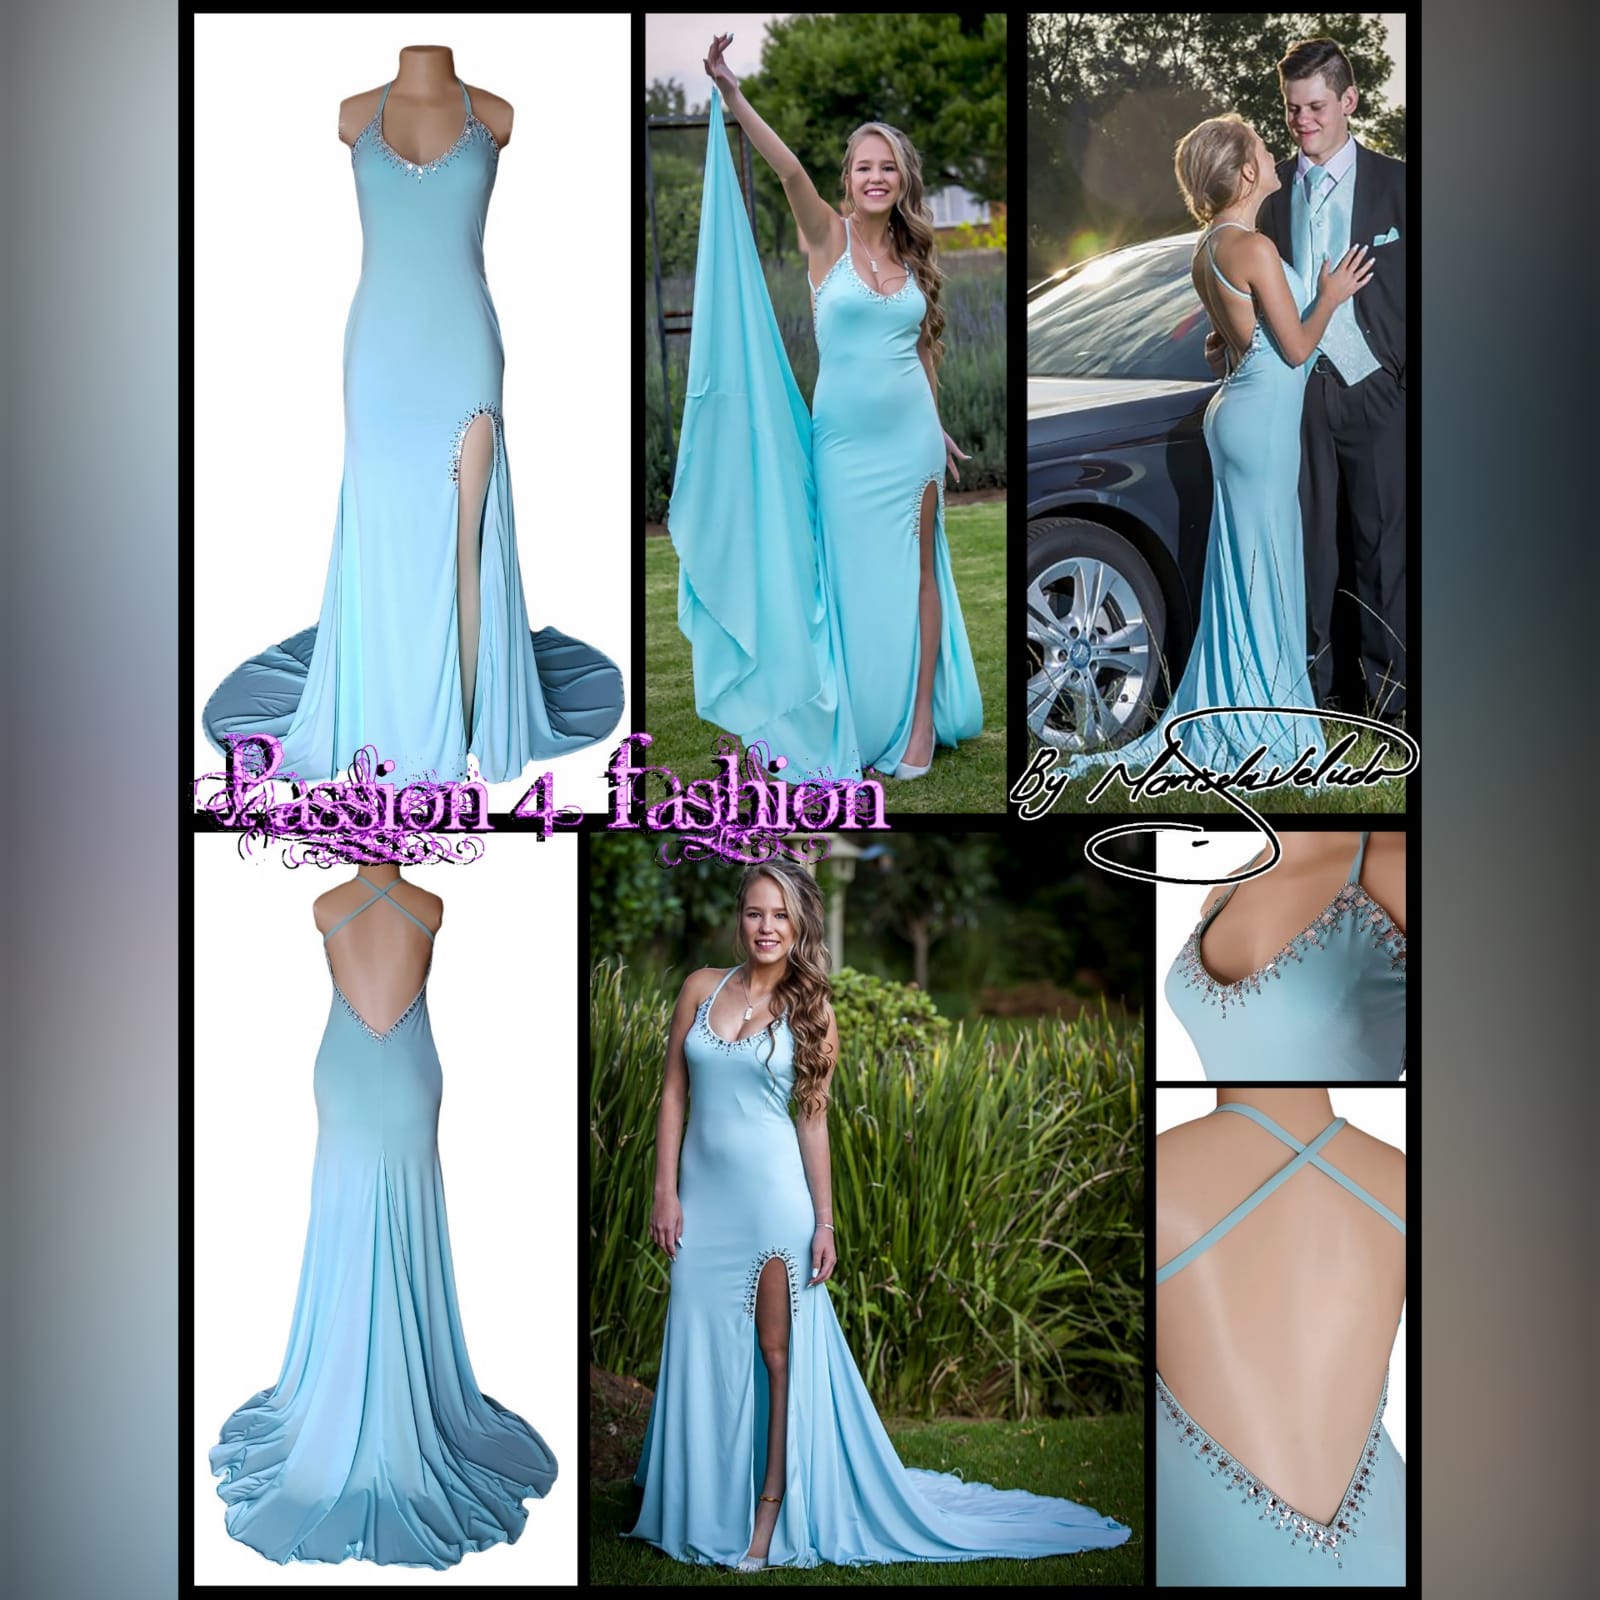 Aqua blue and silver prom dress 9 aqua blue and silver prom dress with a rounded neckline, open low v back with thin crossed straps, slit and a train. Dress detailed with silver beads and stones.